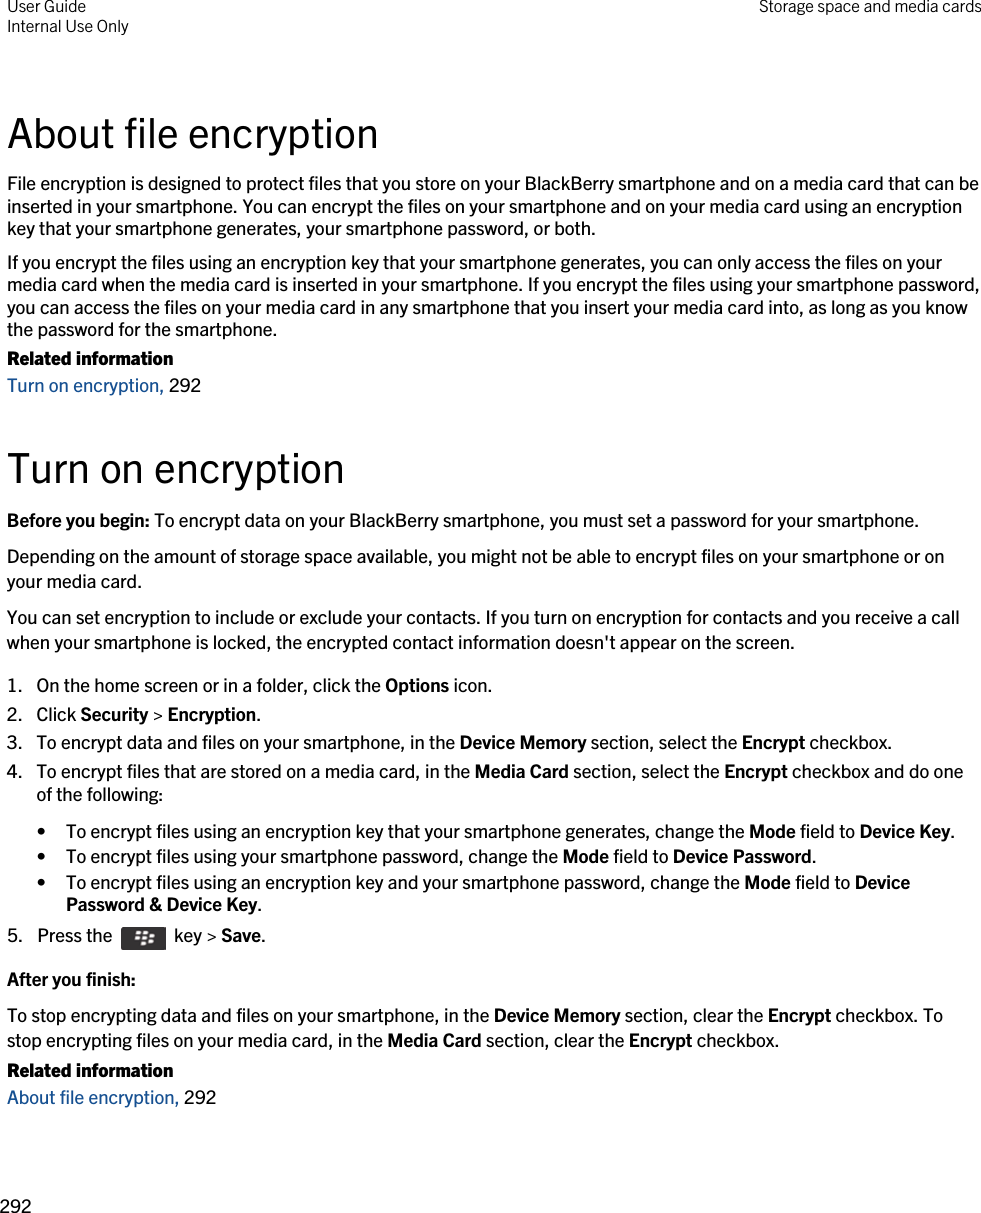 About file encryptionFile encryption is designed to protect files that you store on your BlackBerry smartphone and on a media card that can be inserted in your smartphone. You can encrypt the files on your smartphone and on your media card using an encryption key that your smartphone generates, your smartphone password, or both.If you encrypt the files using an encryption key that your smartphone generates, you can only access the files on your media card when the media card is inserted in your smartphone. If you encrypt the files using your smartphone password, you can access the files on your media card in any smartphone that you insert your media card into, as long as you know the password for the smartphone.Related informationTurn on encryption, 292Turn on encryptionBefore you begin: To encrypt data on your BlackBerry smartphone, you must set a password for your smartphone.Depending on the amount of storage space available, you might not be able to encrypt files on your smartphone or on your media card.You can set encryption to include or exclude your contacts. If you turn on encryption for contacts and you receive a call when your smartphone is locked, the encrypted contact information doesn&apos;t appear on the screen.1. On the home screen or in a folder, click the Options icon.2. Click Security &gt; Encryption.3. To encrypt data and files on your smartphone, in the Device Memory section, select the Encrypt checkbox.4. To encrypt files that are stored on a media card, in the Media Card section, select the Encrypt checkbox and do one of the following:• To encrypt files using an encryption key that your smartphone generates, change the Mode field to Device Key.• To encrypt files using your smartphone password, change the Mode field to Device Password.• To encrypt files using an encryption key and your smartphone password, change the Mode field to Device Password &amp; Device Key.5.  Press the    key &gt; Save. After you finish: To stop encrypting data and files on your smartphone, in the Device Memory section, clear the Encrypt checkbox. To stop encrypting files on your media card, in the Media Card section, clear the Encrypt checkbox.Related informationAbout file encryption, 292 User GuideInternal Use Only Storage space and media cards292 